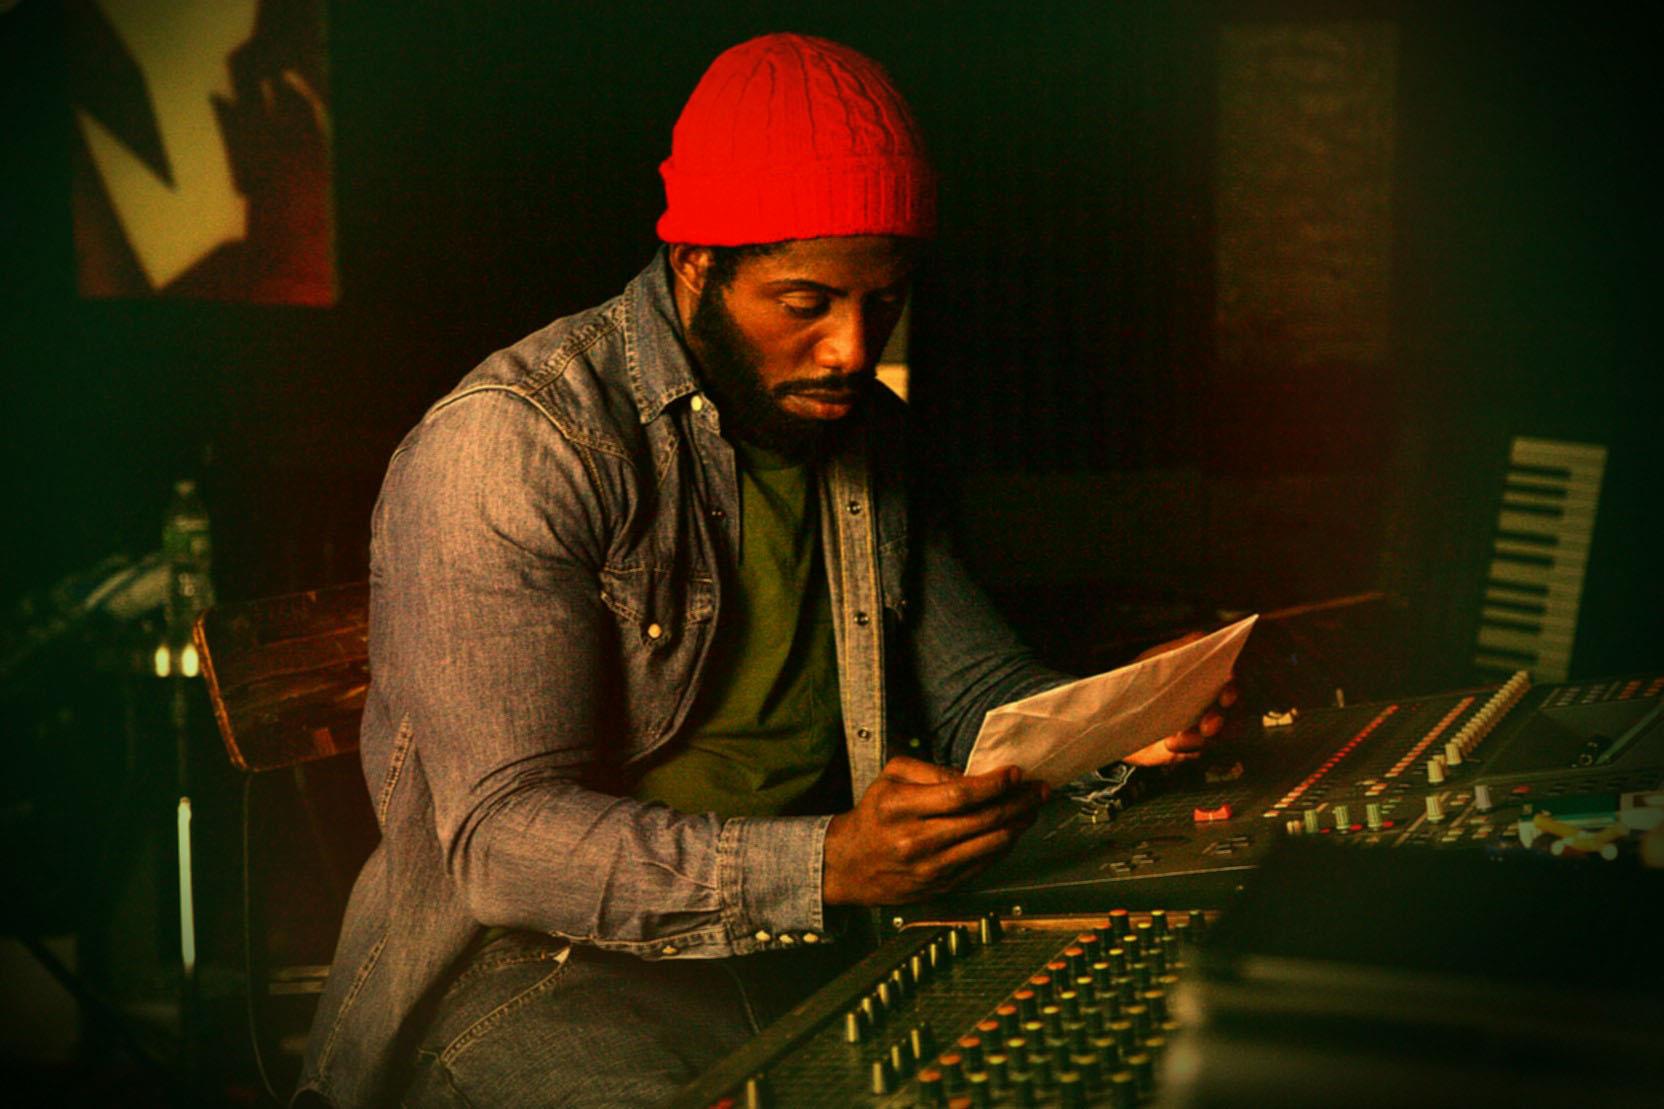 Damian Bailey as Marvin Gaye in MUSIC: A Marvin Gaye Story